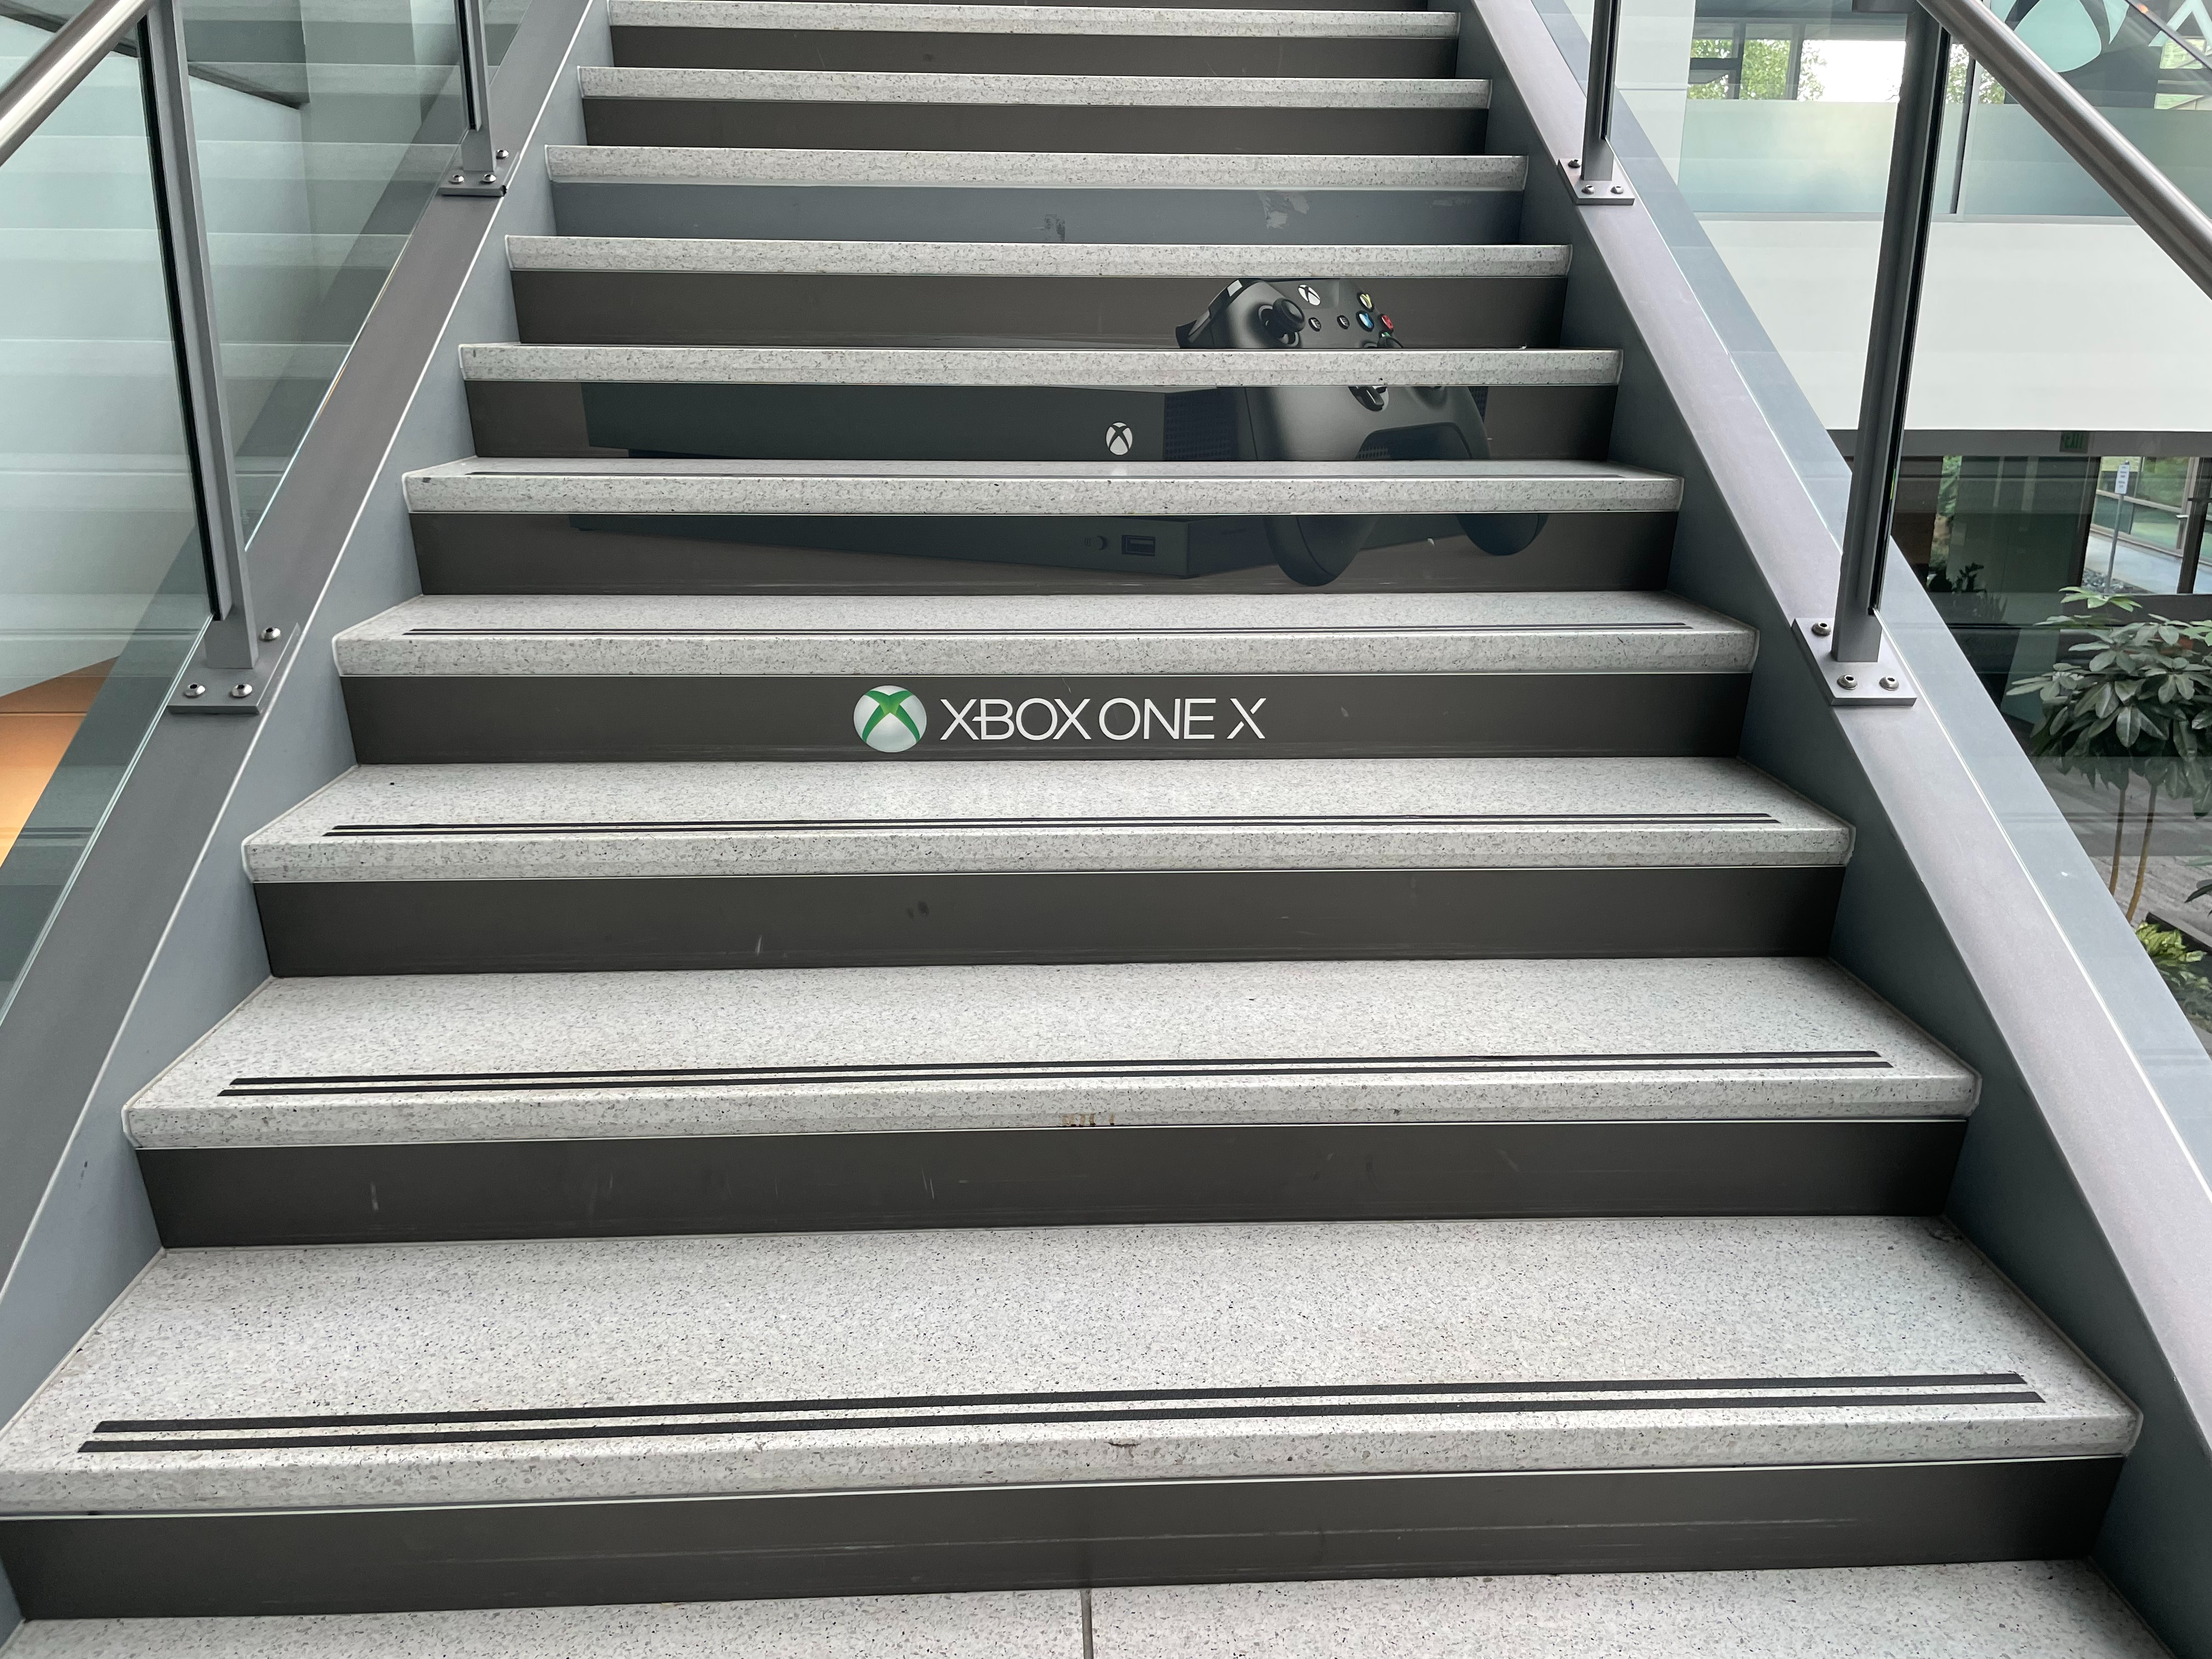 Image of stairs in Studio D at xbox with a wrap depicting their logo and a controller